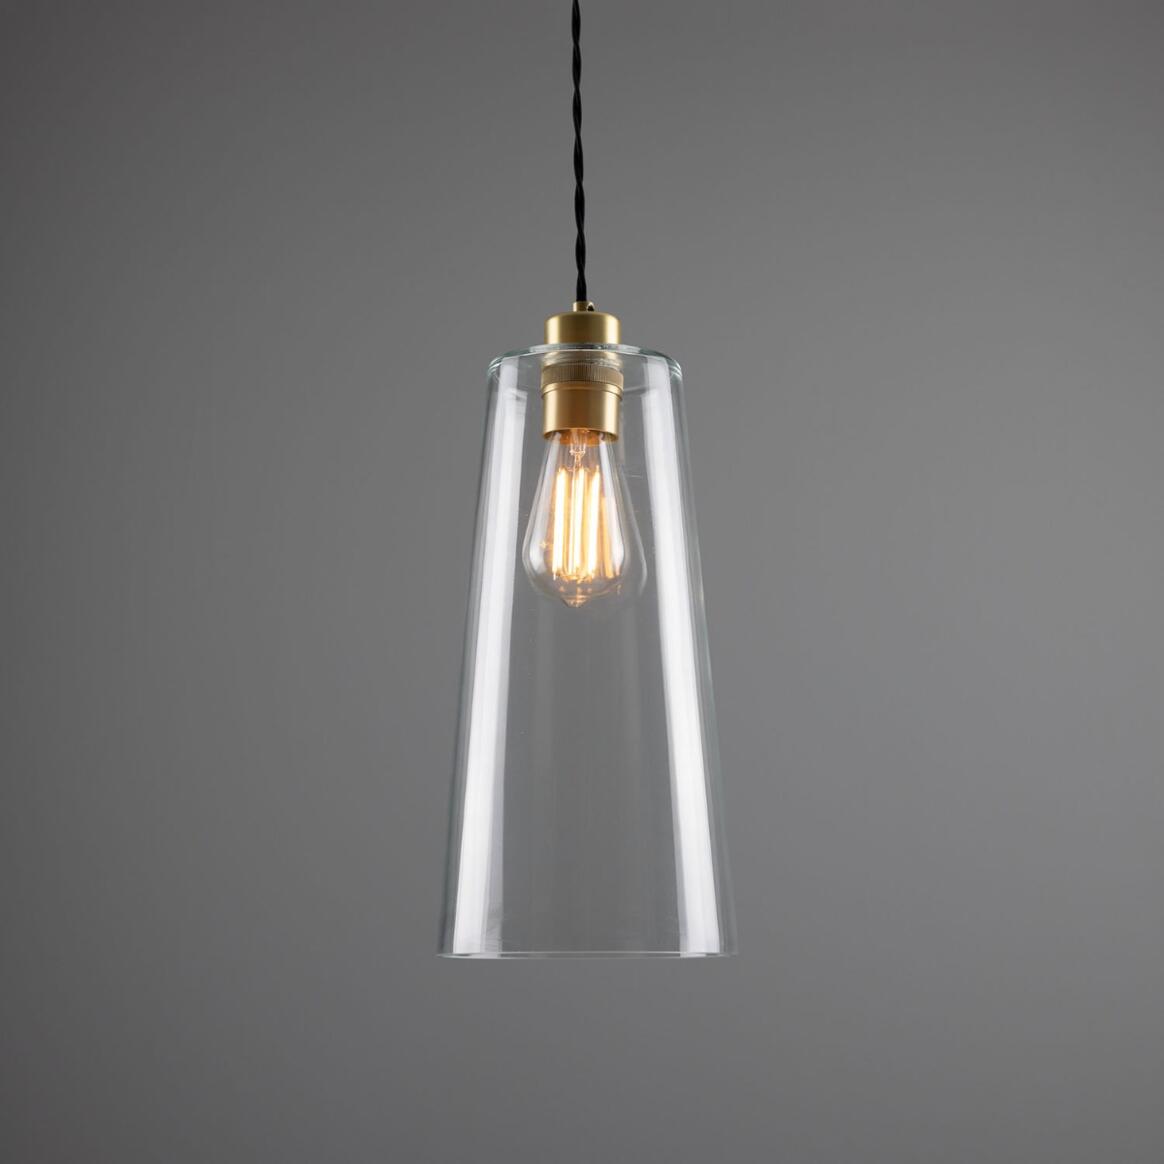 Malang Tall Slender Clear Glass Pendant Light 14cm main product image